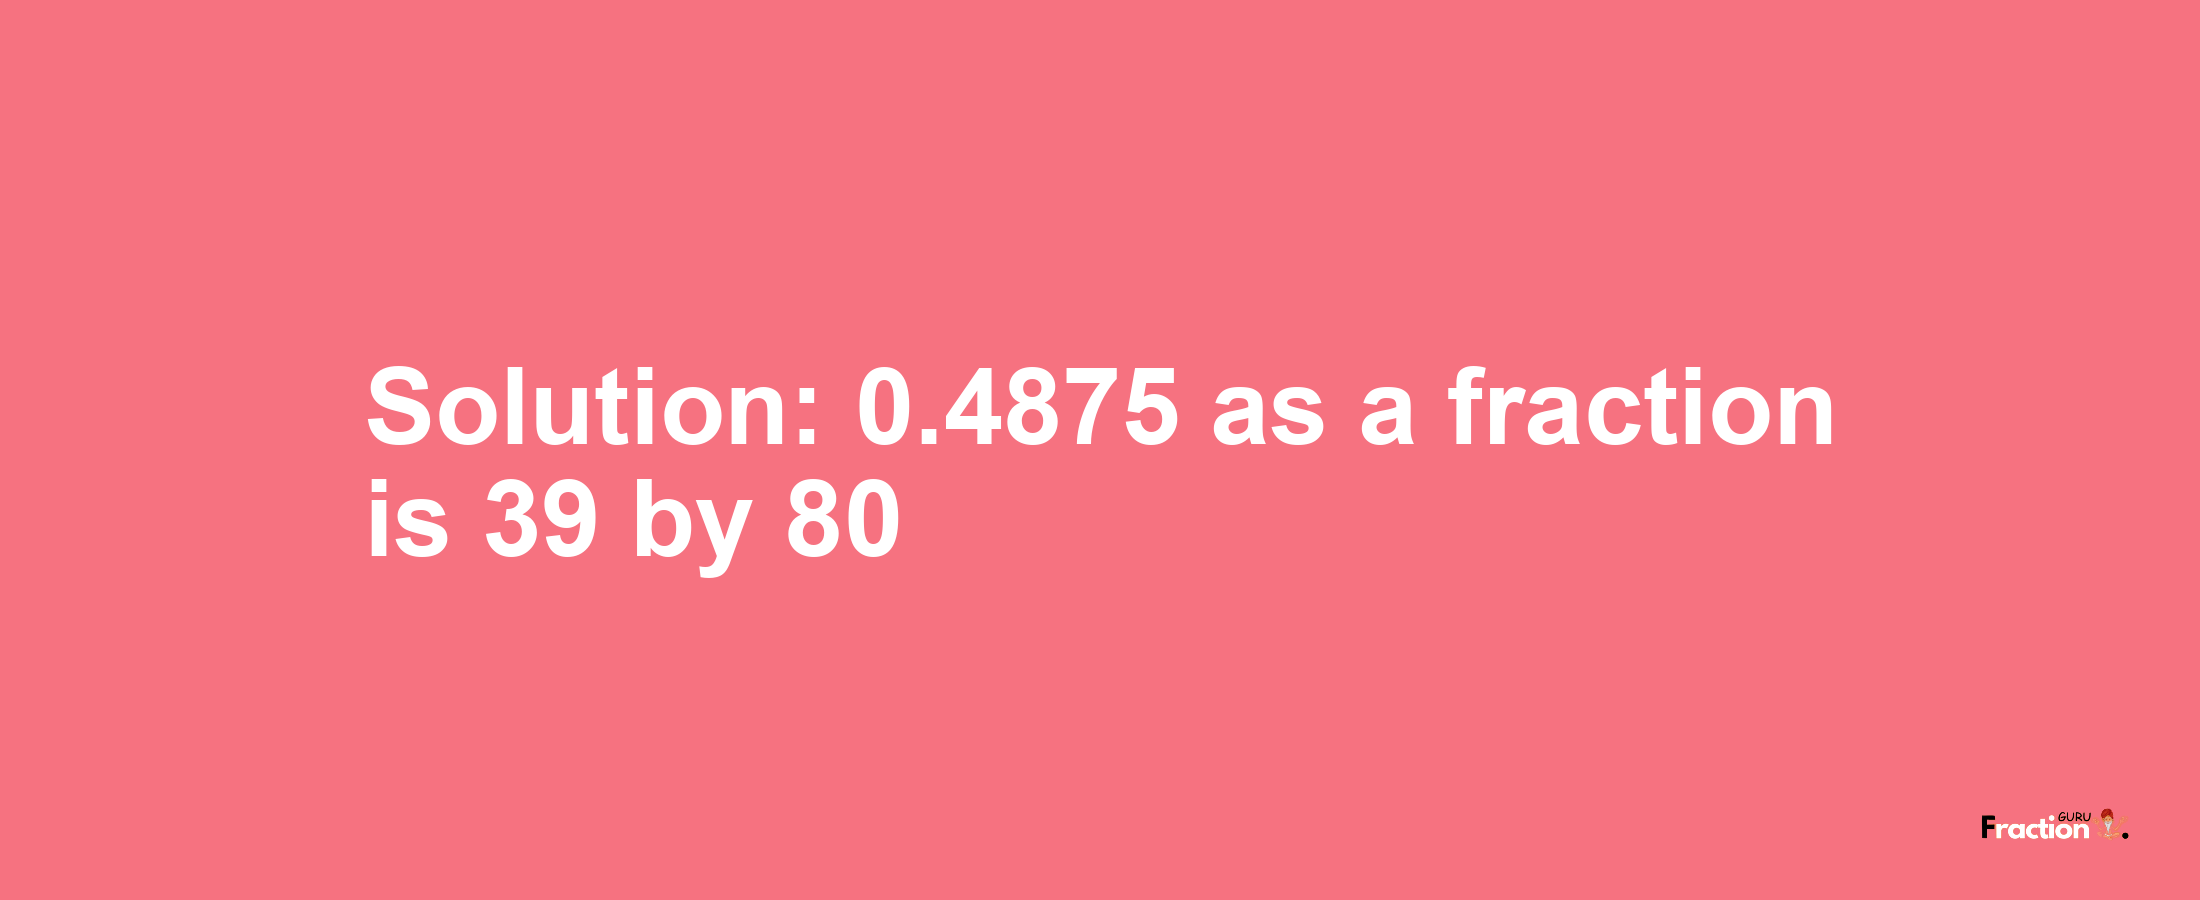 Solution:0.4875 as a fraction is 39/80